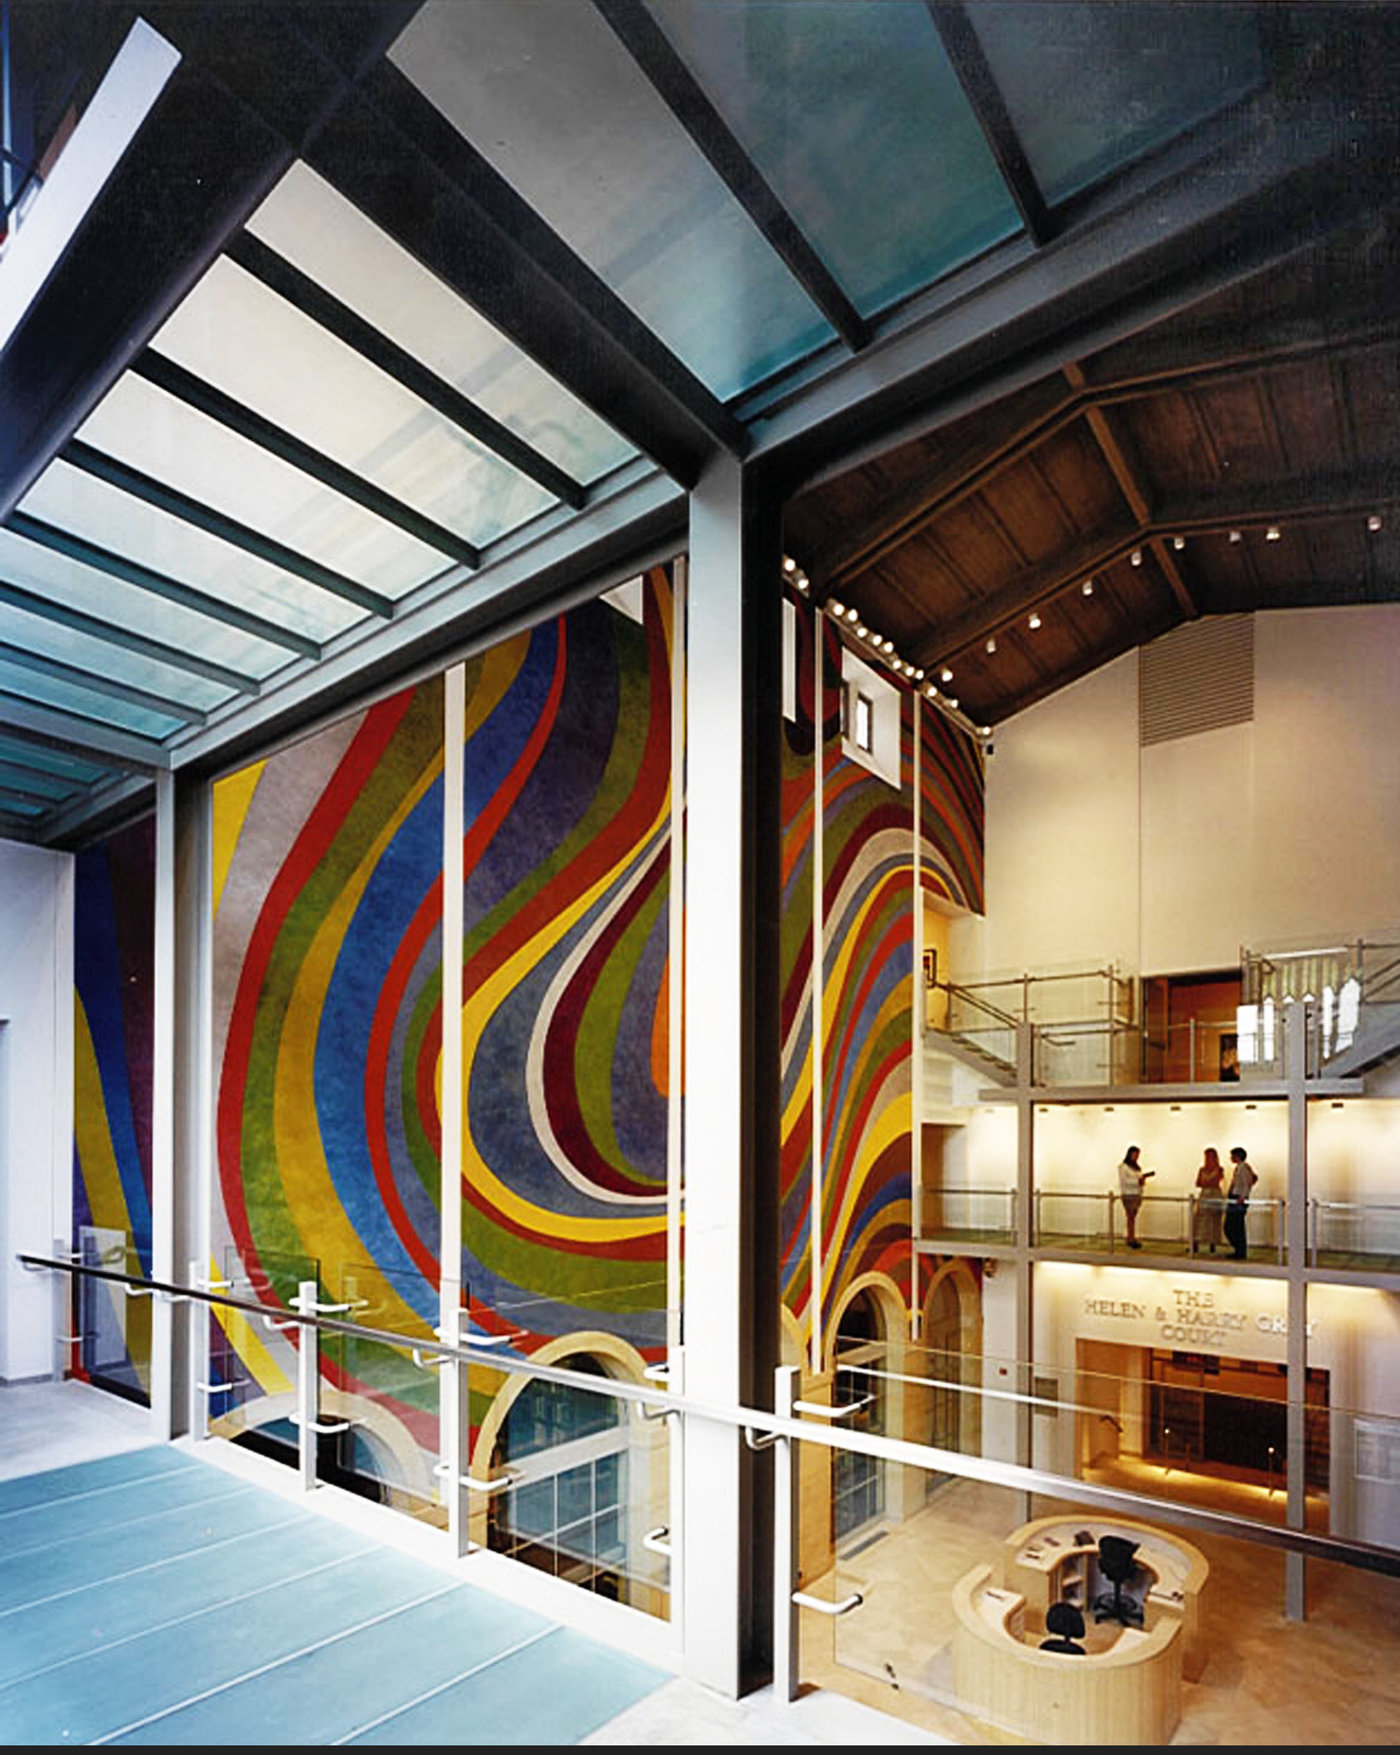 5 tskp wadsworth atheneum the helen and harry gray court glass bridges level 2 above main entrance mural shot 1400 0x0x2338x2931 q85